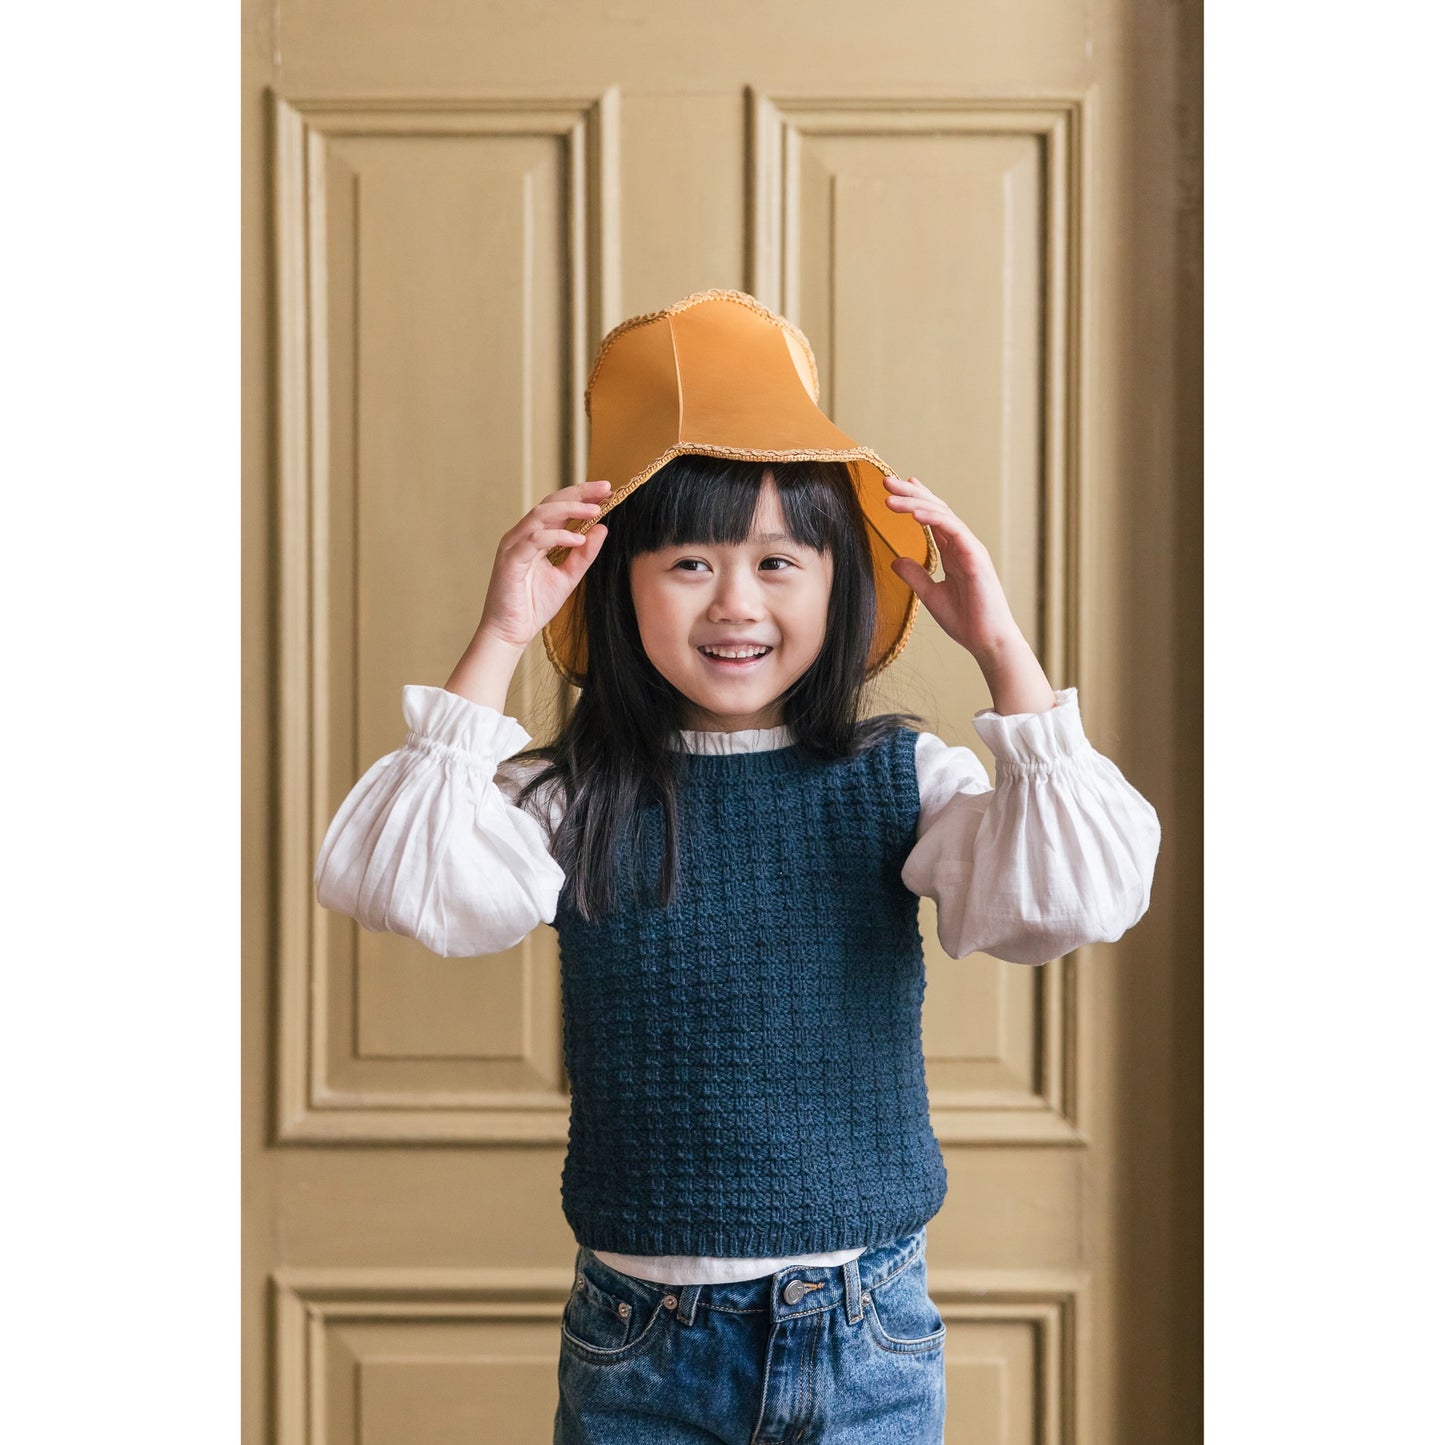 Making Memories: Timeless Knits for Children by Claudia Quintanilla